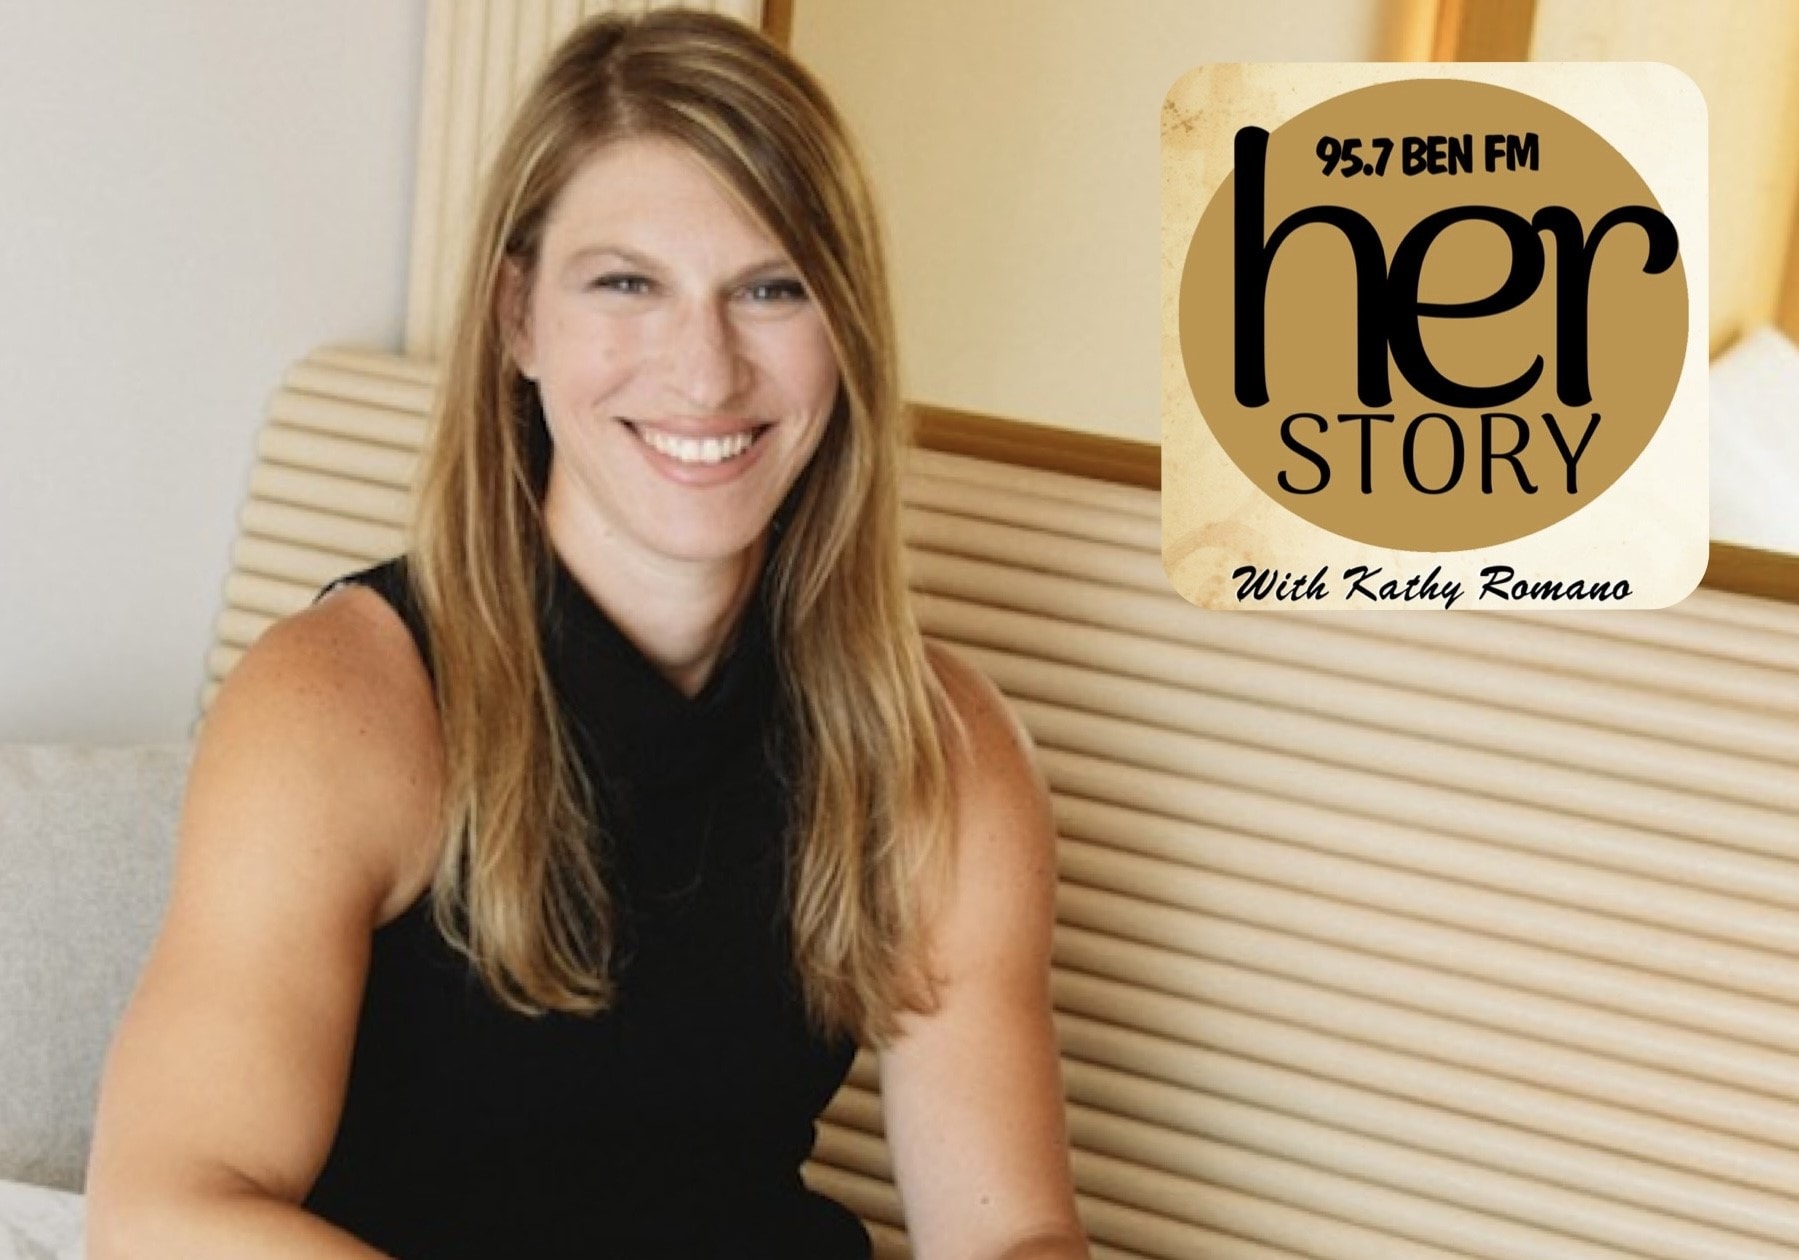 Dr Shelby Harris Shares Her Story With Kathy Romano 0499